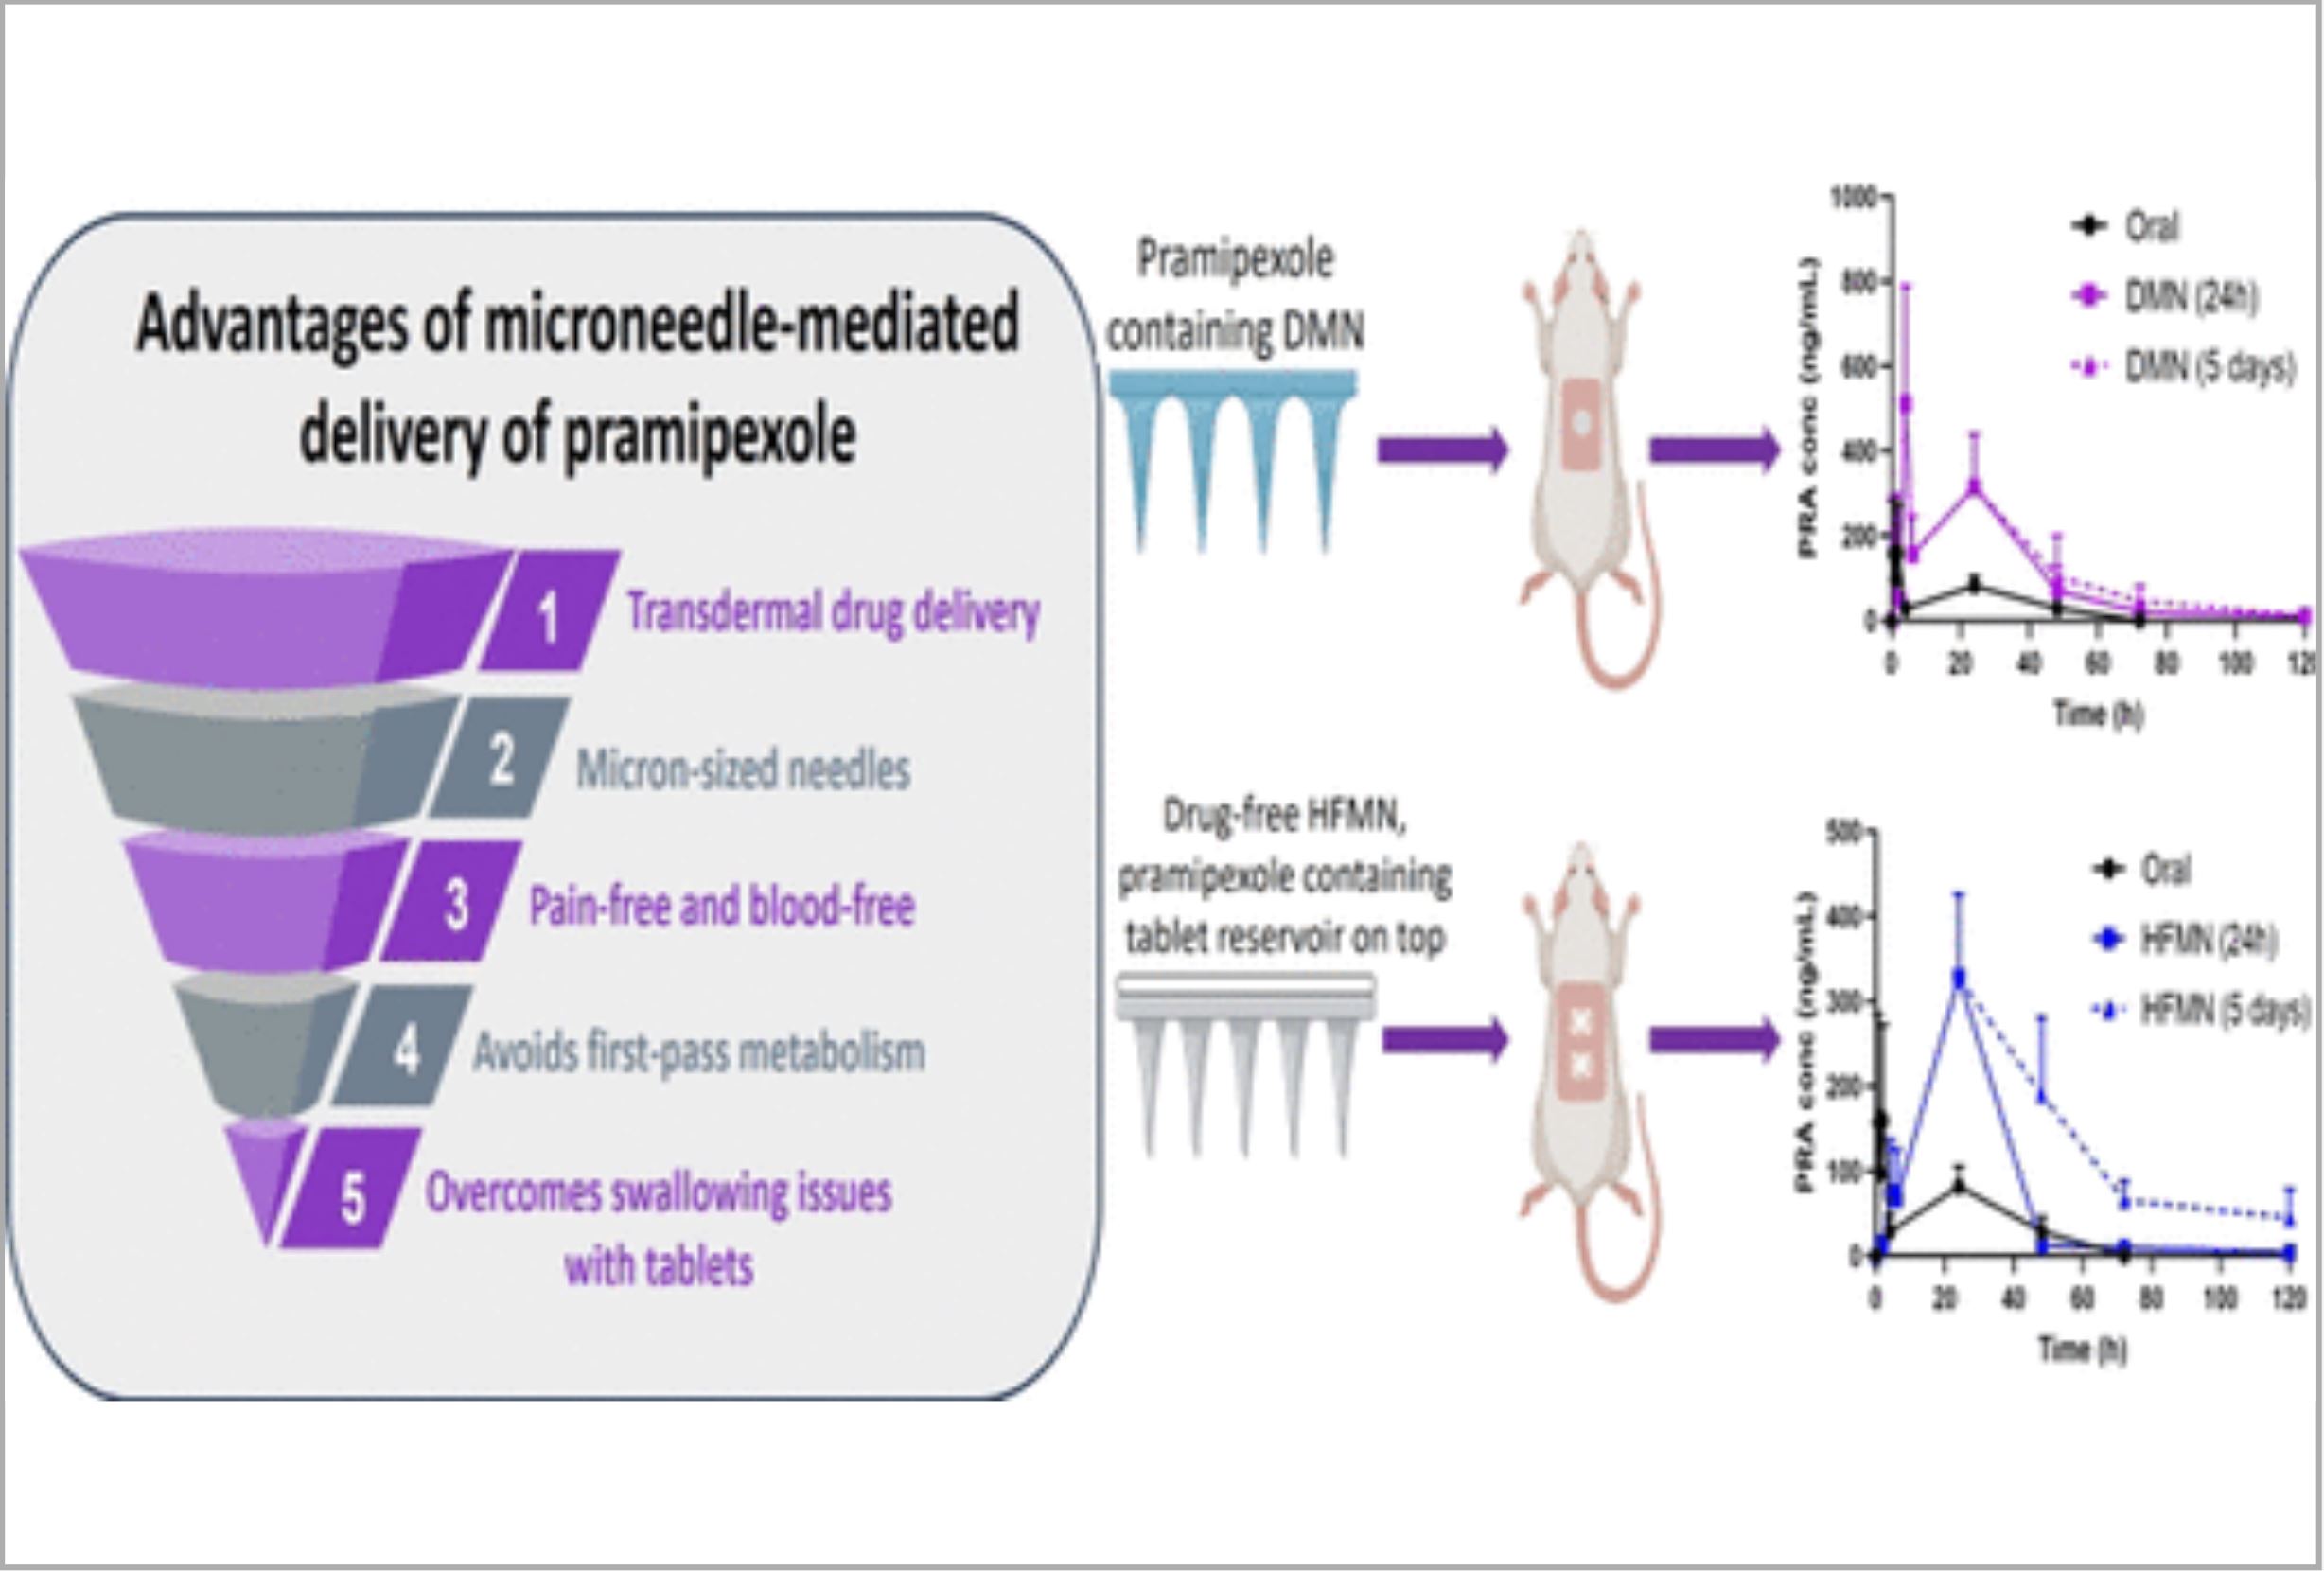 Transdermal Delivery of Pramipexole Using Microneedle Technology for the Potential Treatment of Parkinson’s Disease